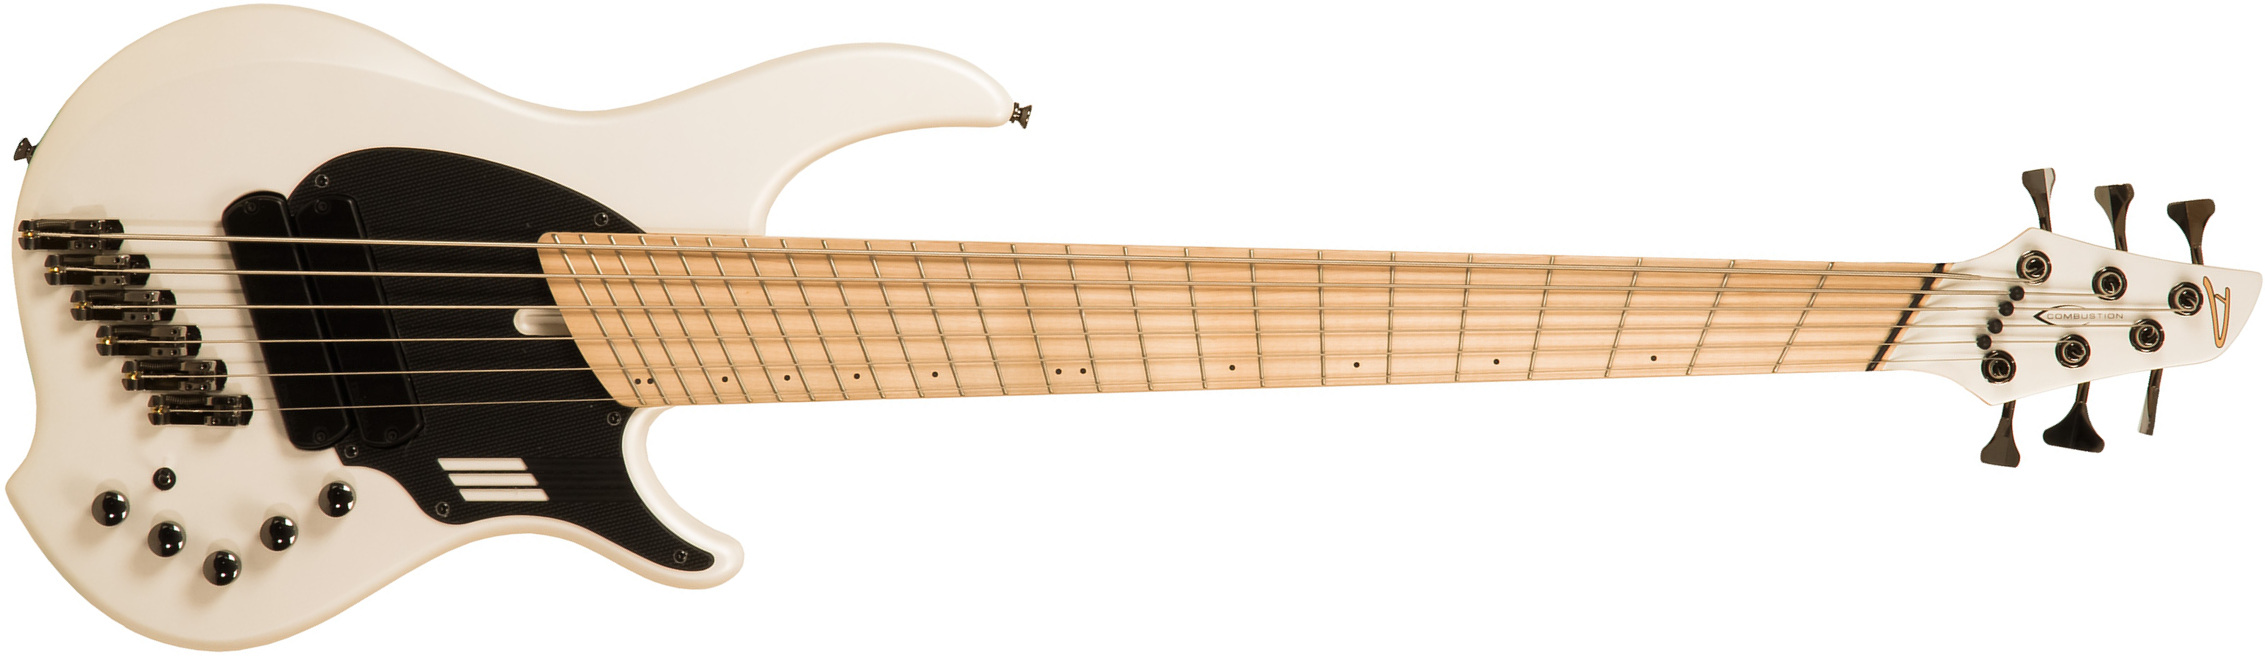 Dingwall Adam Nolly Getgood Ng2 6c 2pu Signature Active Mn - Ducati Pearl White - Solid body electric bass - Main picture